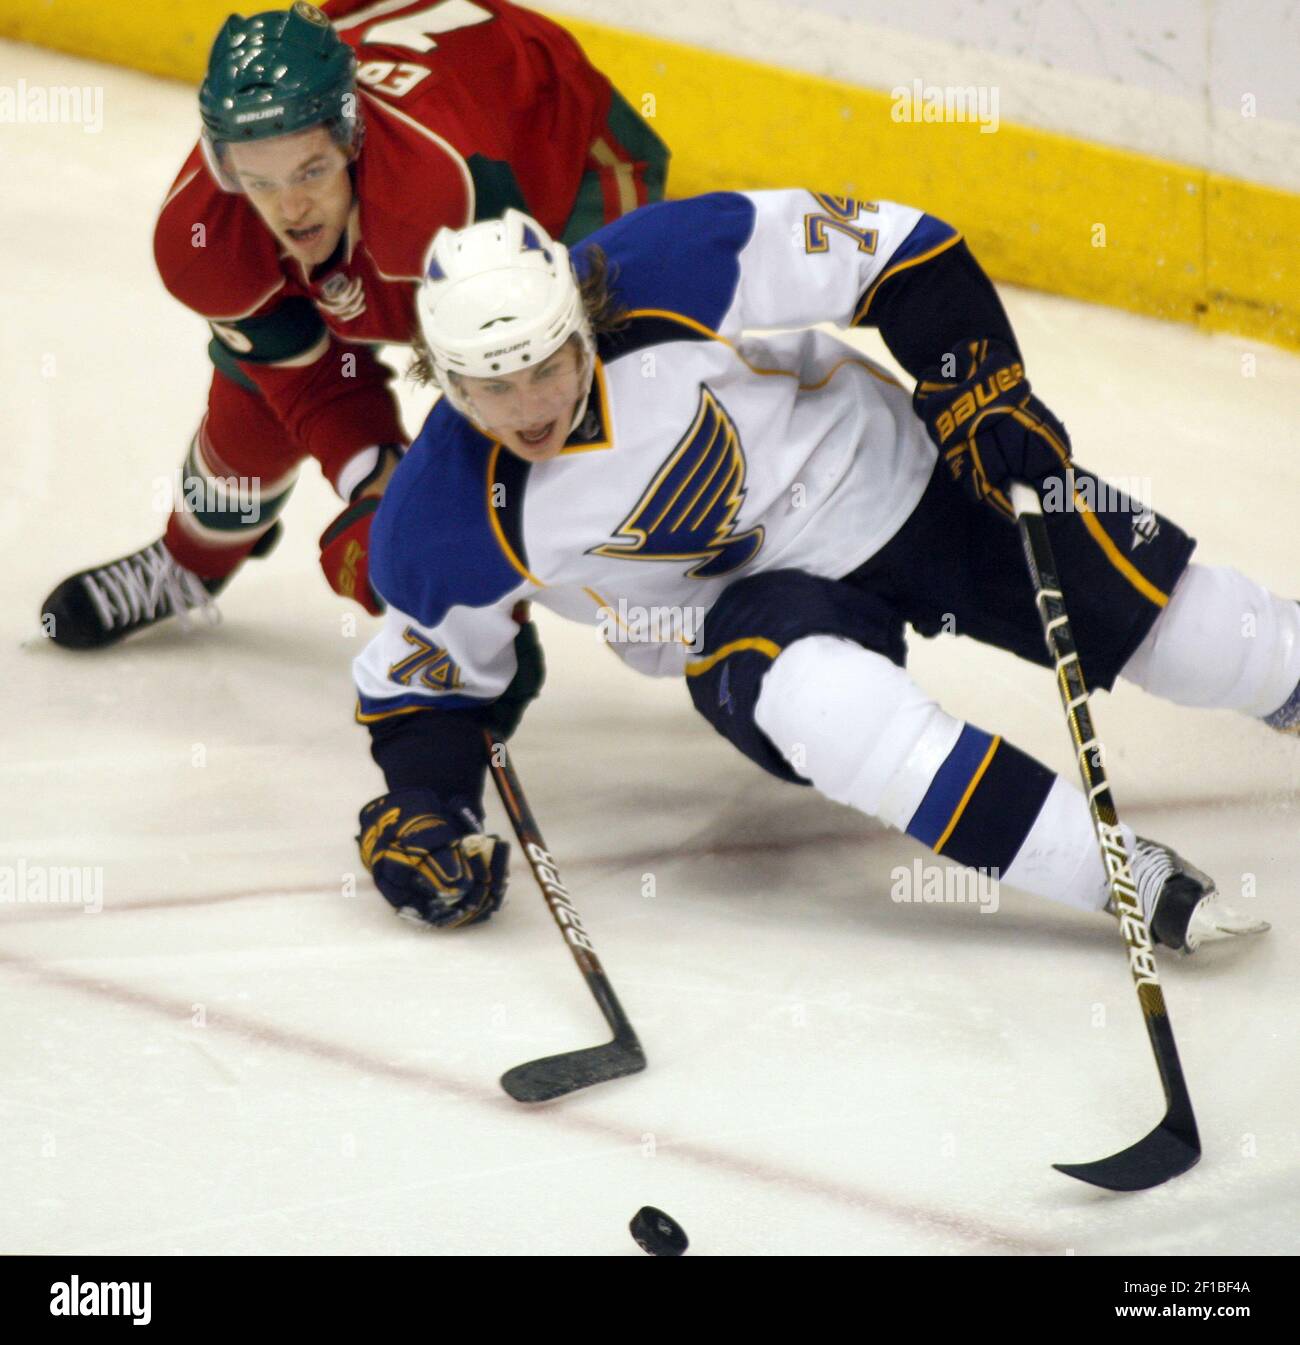 St. Louis Blues T.J. Oshie stretches before a pre-season game against the  Colorado Avalanche at the Scottrade Center in St. Louis on September 21,  2010. UPI/Bill Greenblatt Stock Photo - Alamy